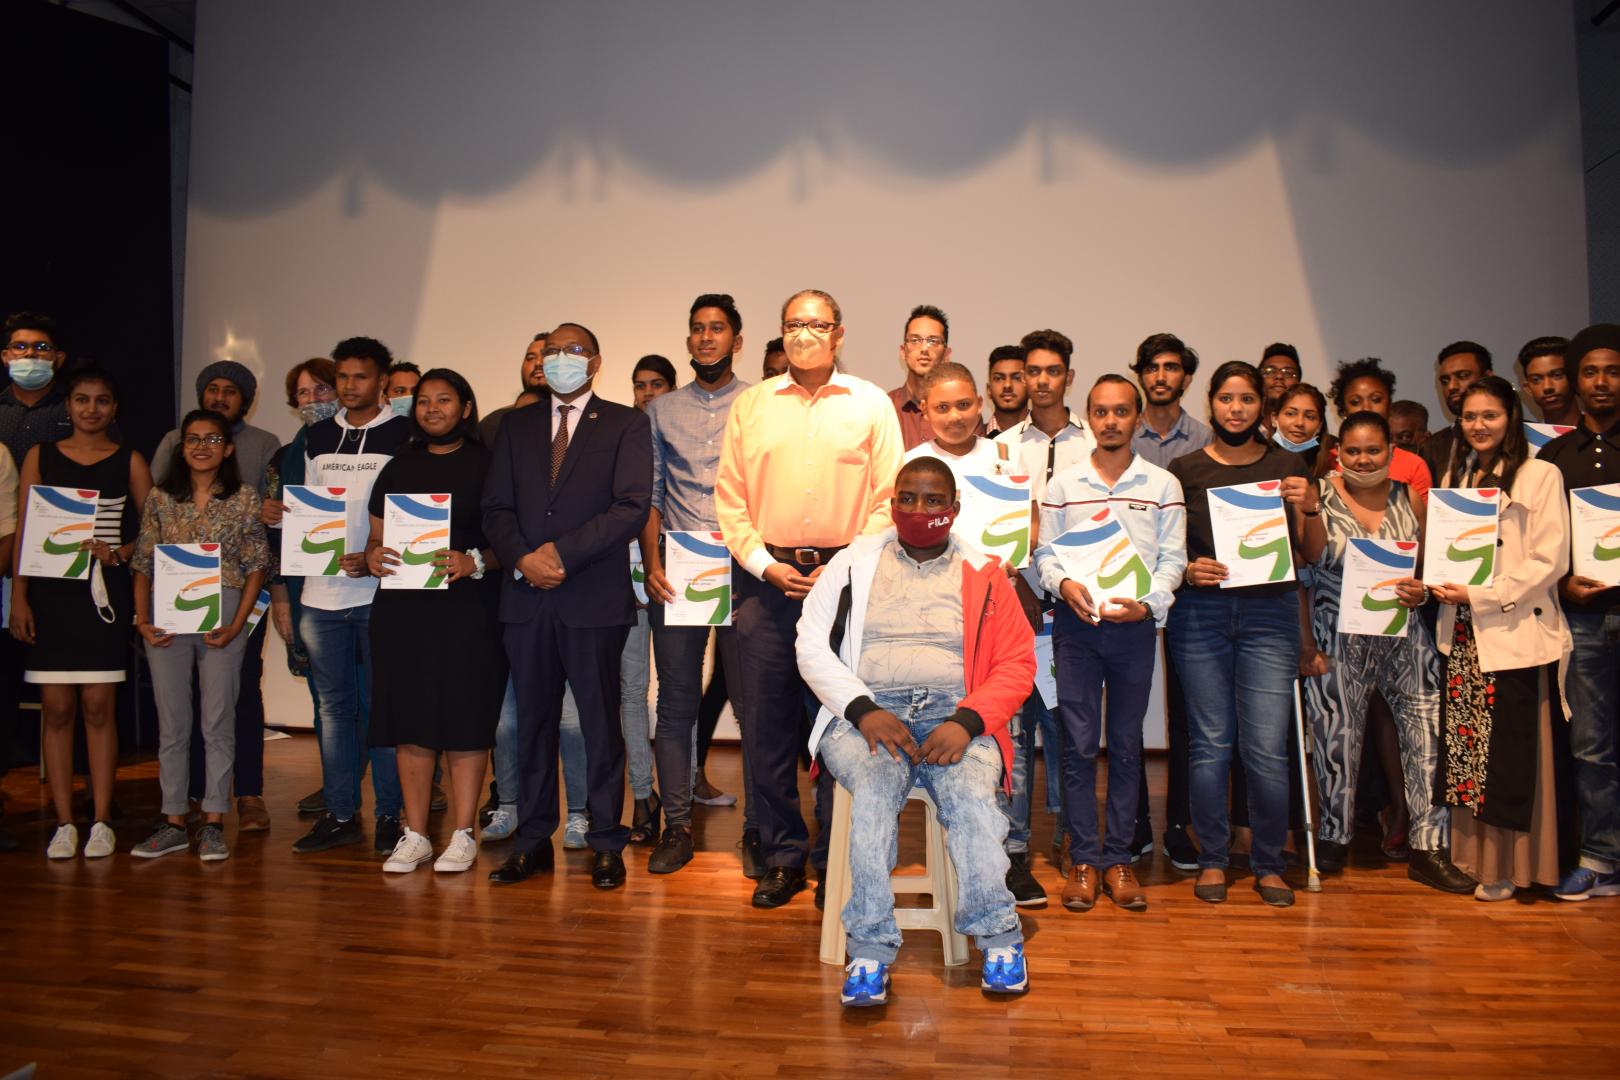 Group photo: Dr L. Musango, WHO Representative in Mauritius and Hon Mr S. Toussaint, Minister of Youth Empowerment, Sports and Recreation (in the centre) with the participants of the National Info Clip Competition